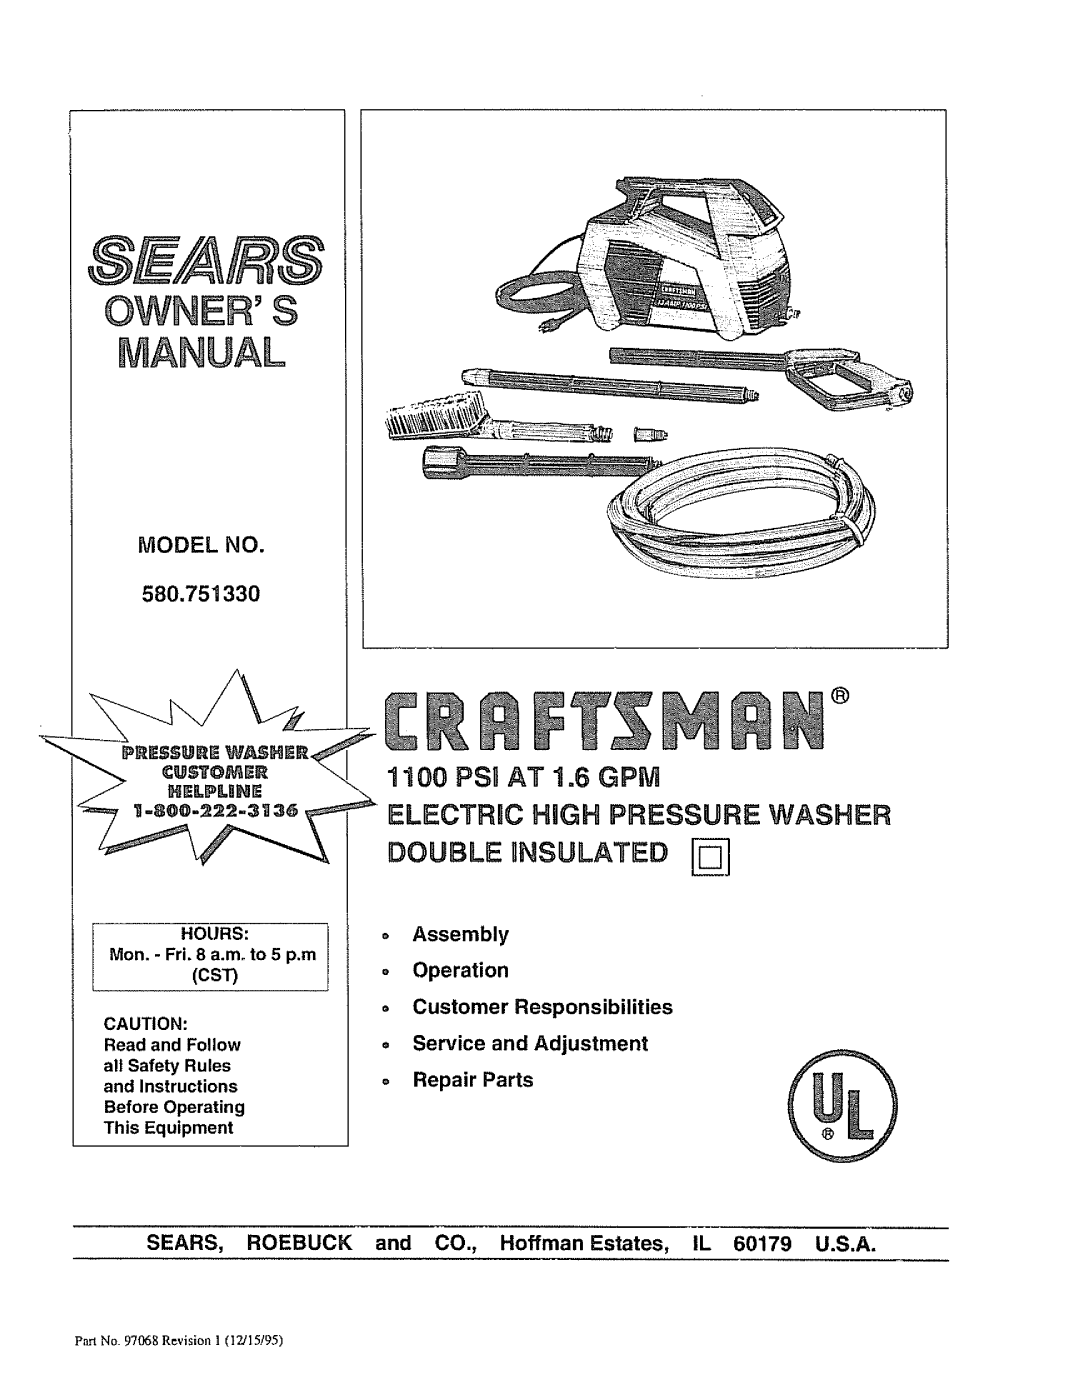 Sears owner manual MODEL NO 580.751330, Manual, Owners, 11O0 PSi AT 1.6 GPM ELECTRnC HnGH PRESSURE WASHER, Double 